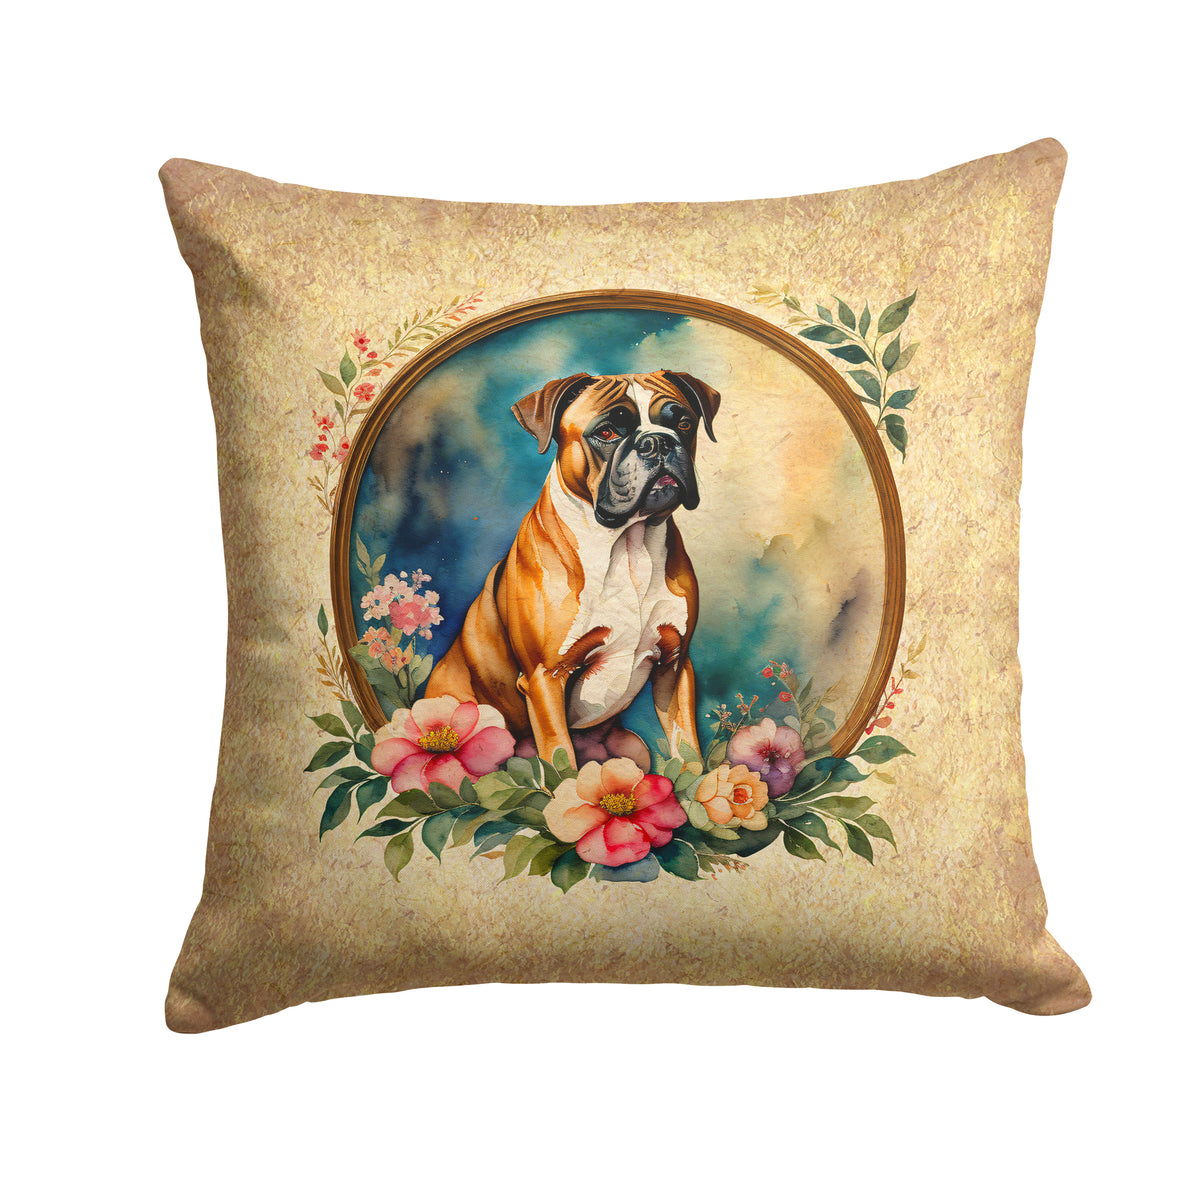 Buy this Boxer and Flowers Fabric Decorative Pillow